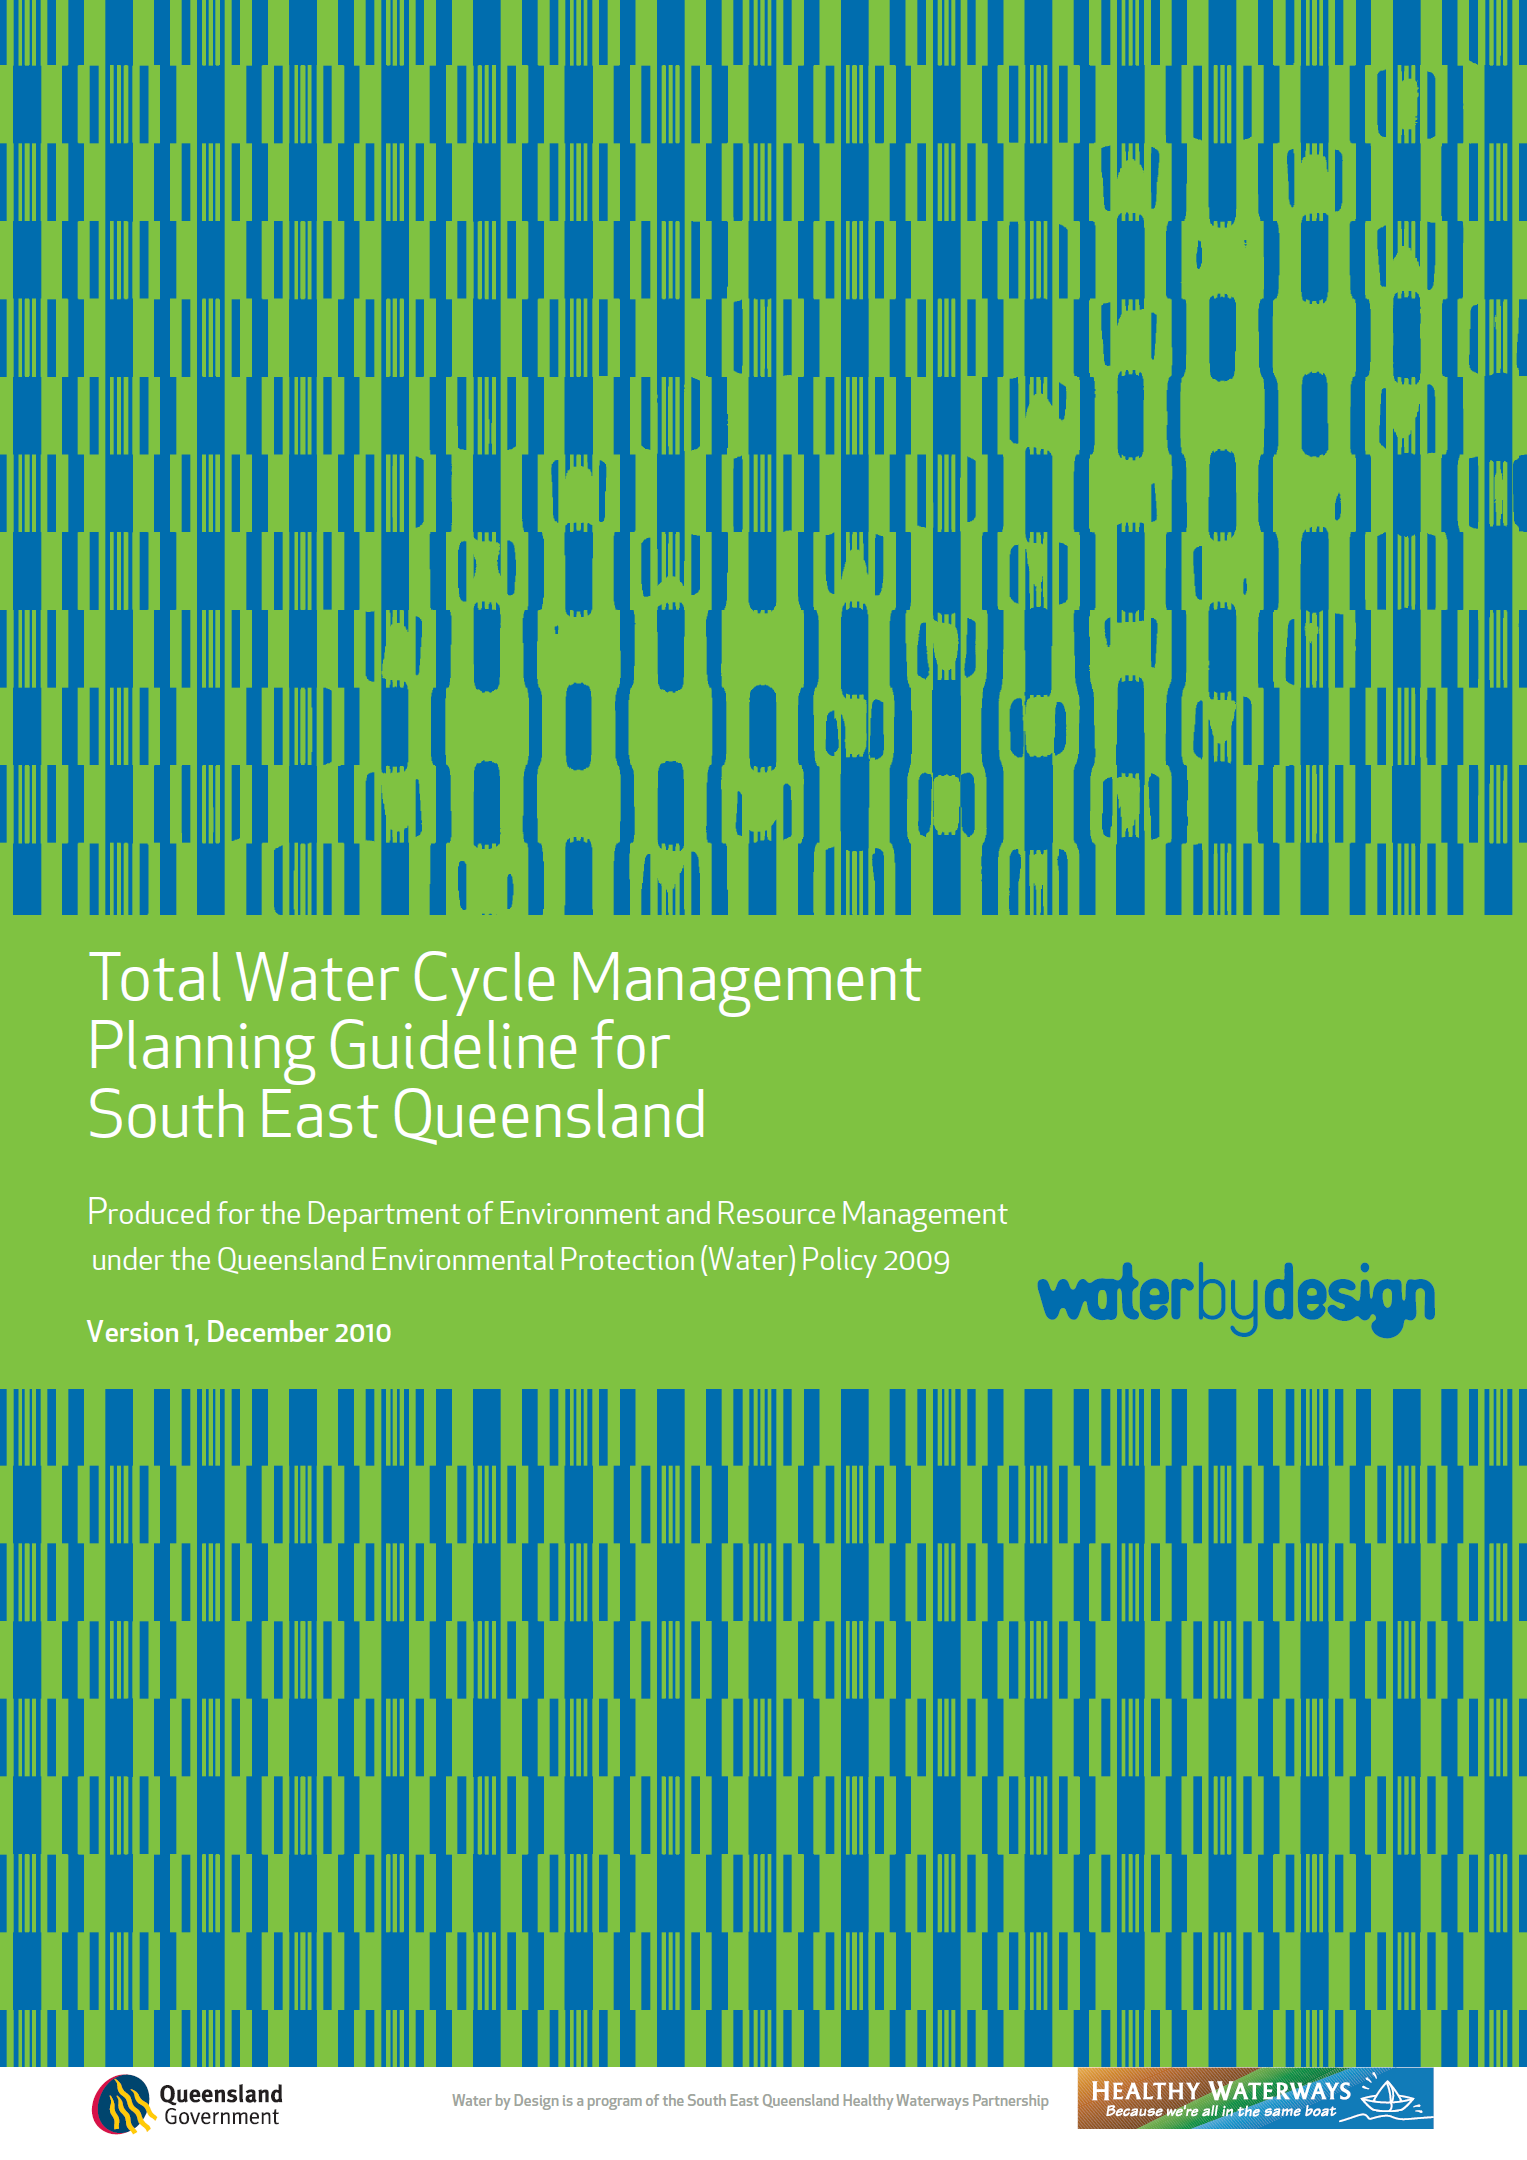 Total Water Cycle Management Planning Guideline for South East Queensland (2010)